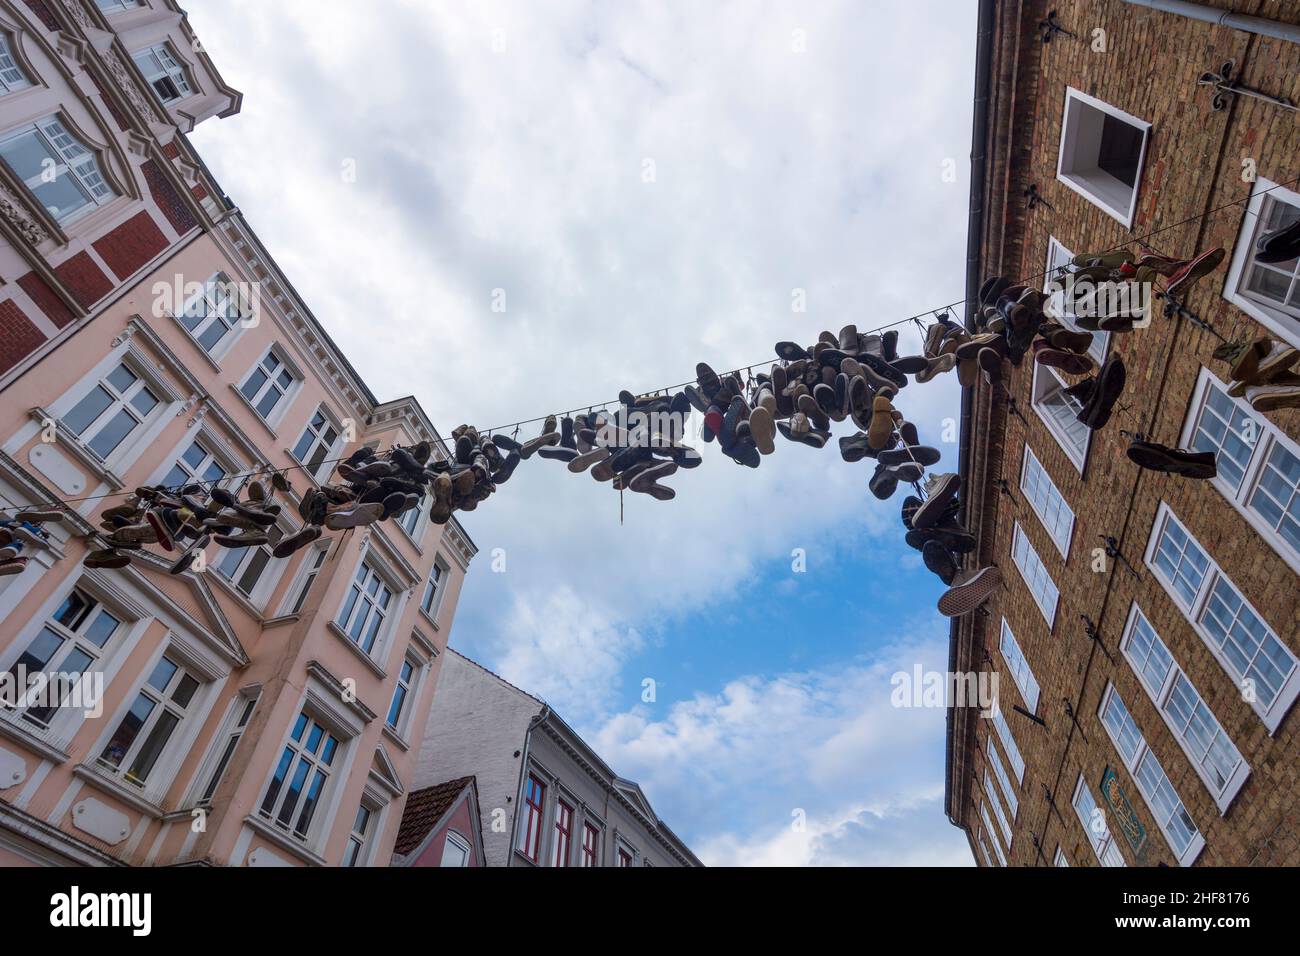 Flensburg,  hanging shoes on Norderstrasse in downtown Flensburg,  Shoefiti in Ostsee (Baltic Sea),  Schleswig-Holstein,  Germany Stock Photo